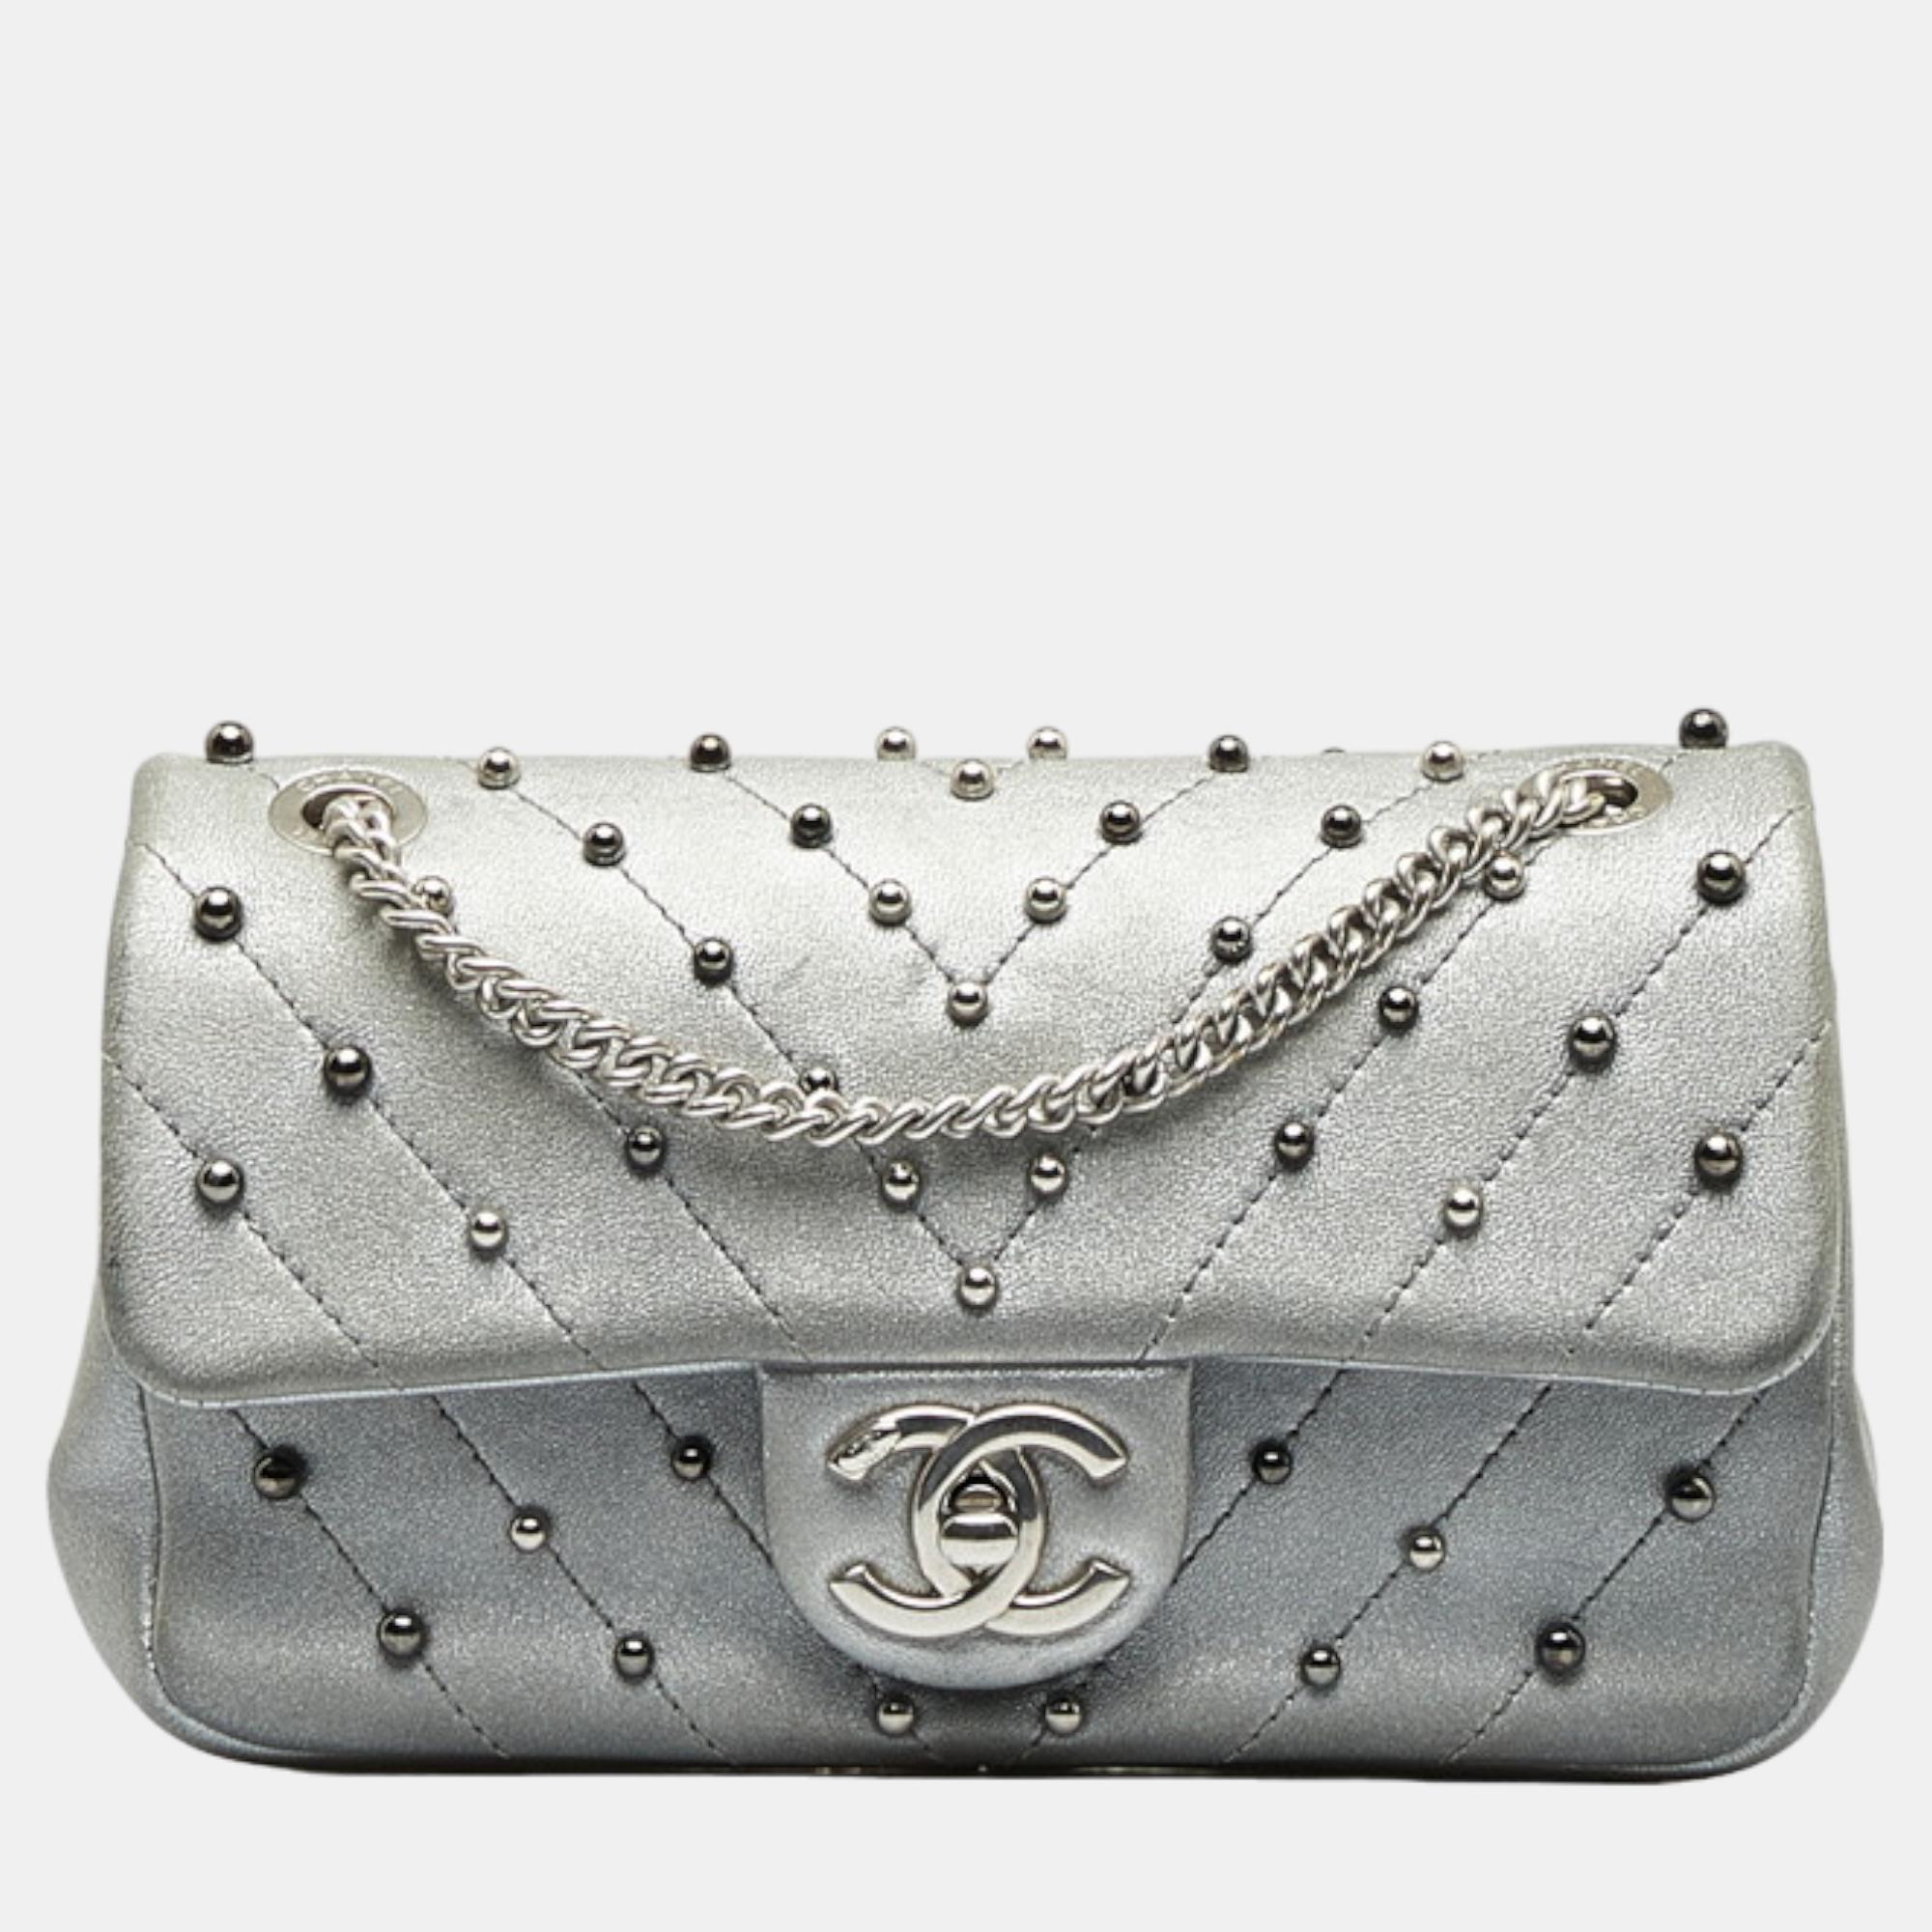 Chanel silver leather cc chevron studded leather flap bag